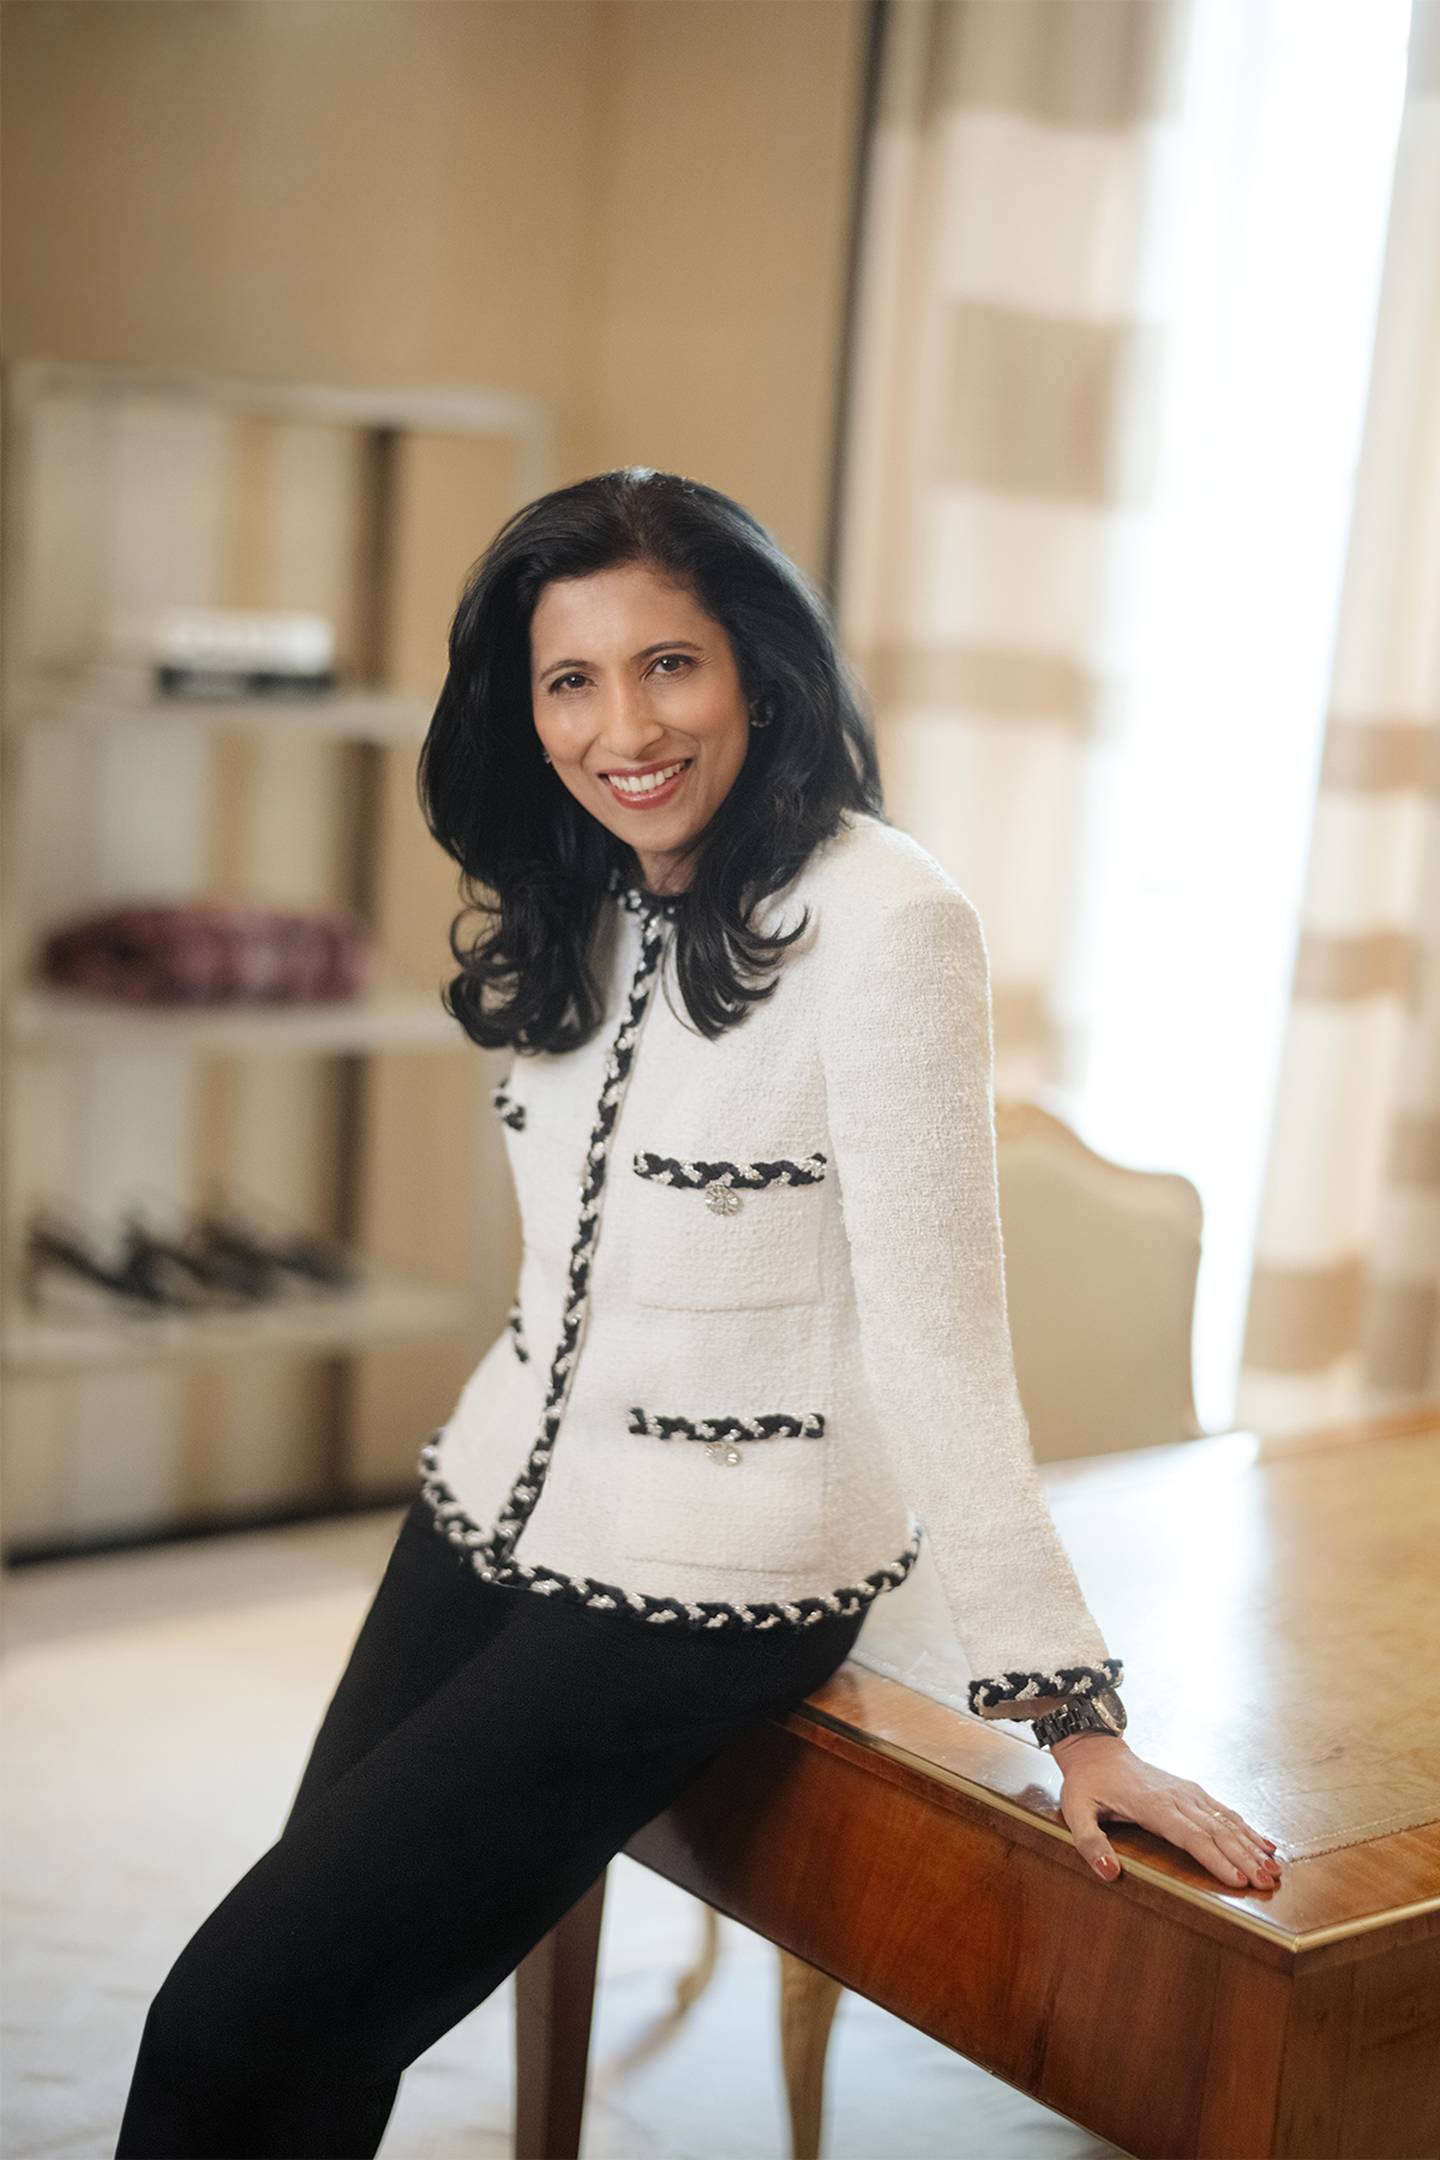 Leena Nair is the global chief executive officer at Chanel.